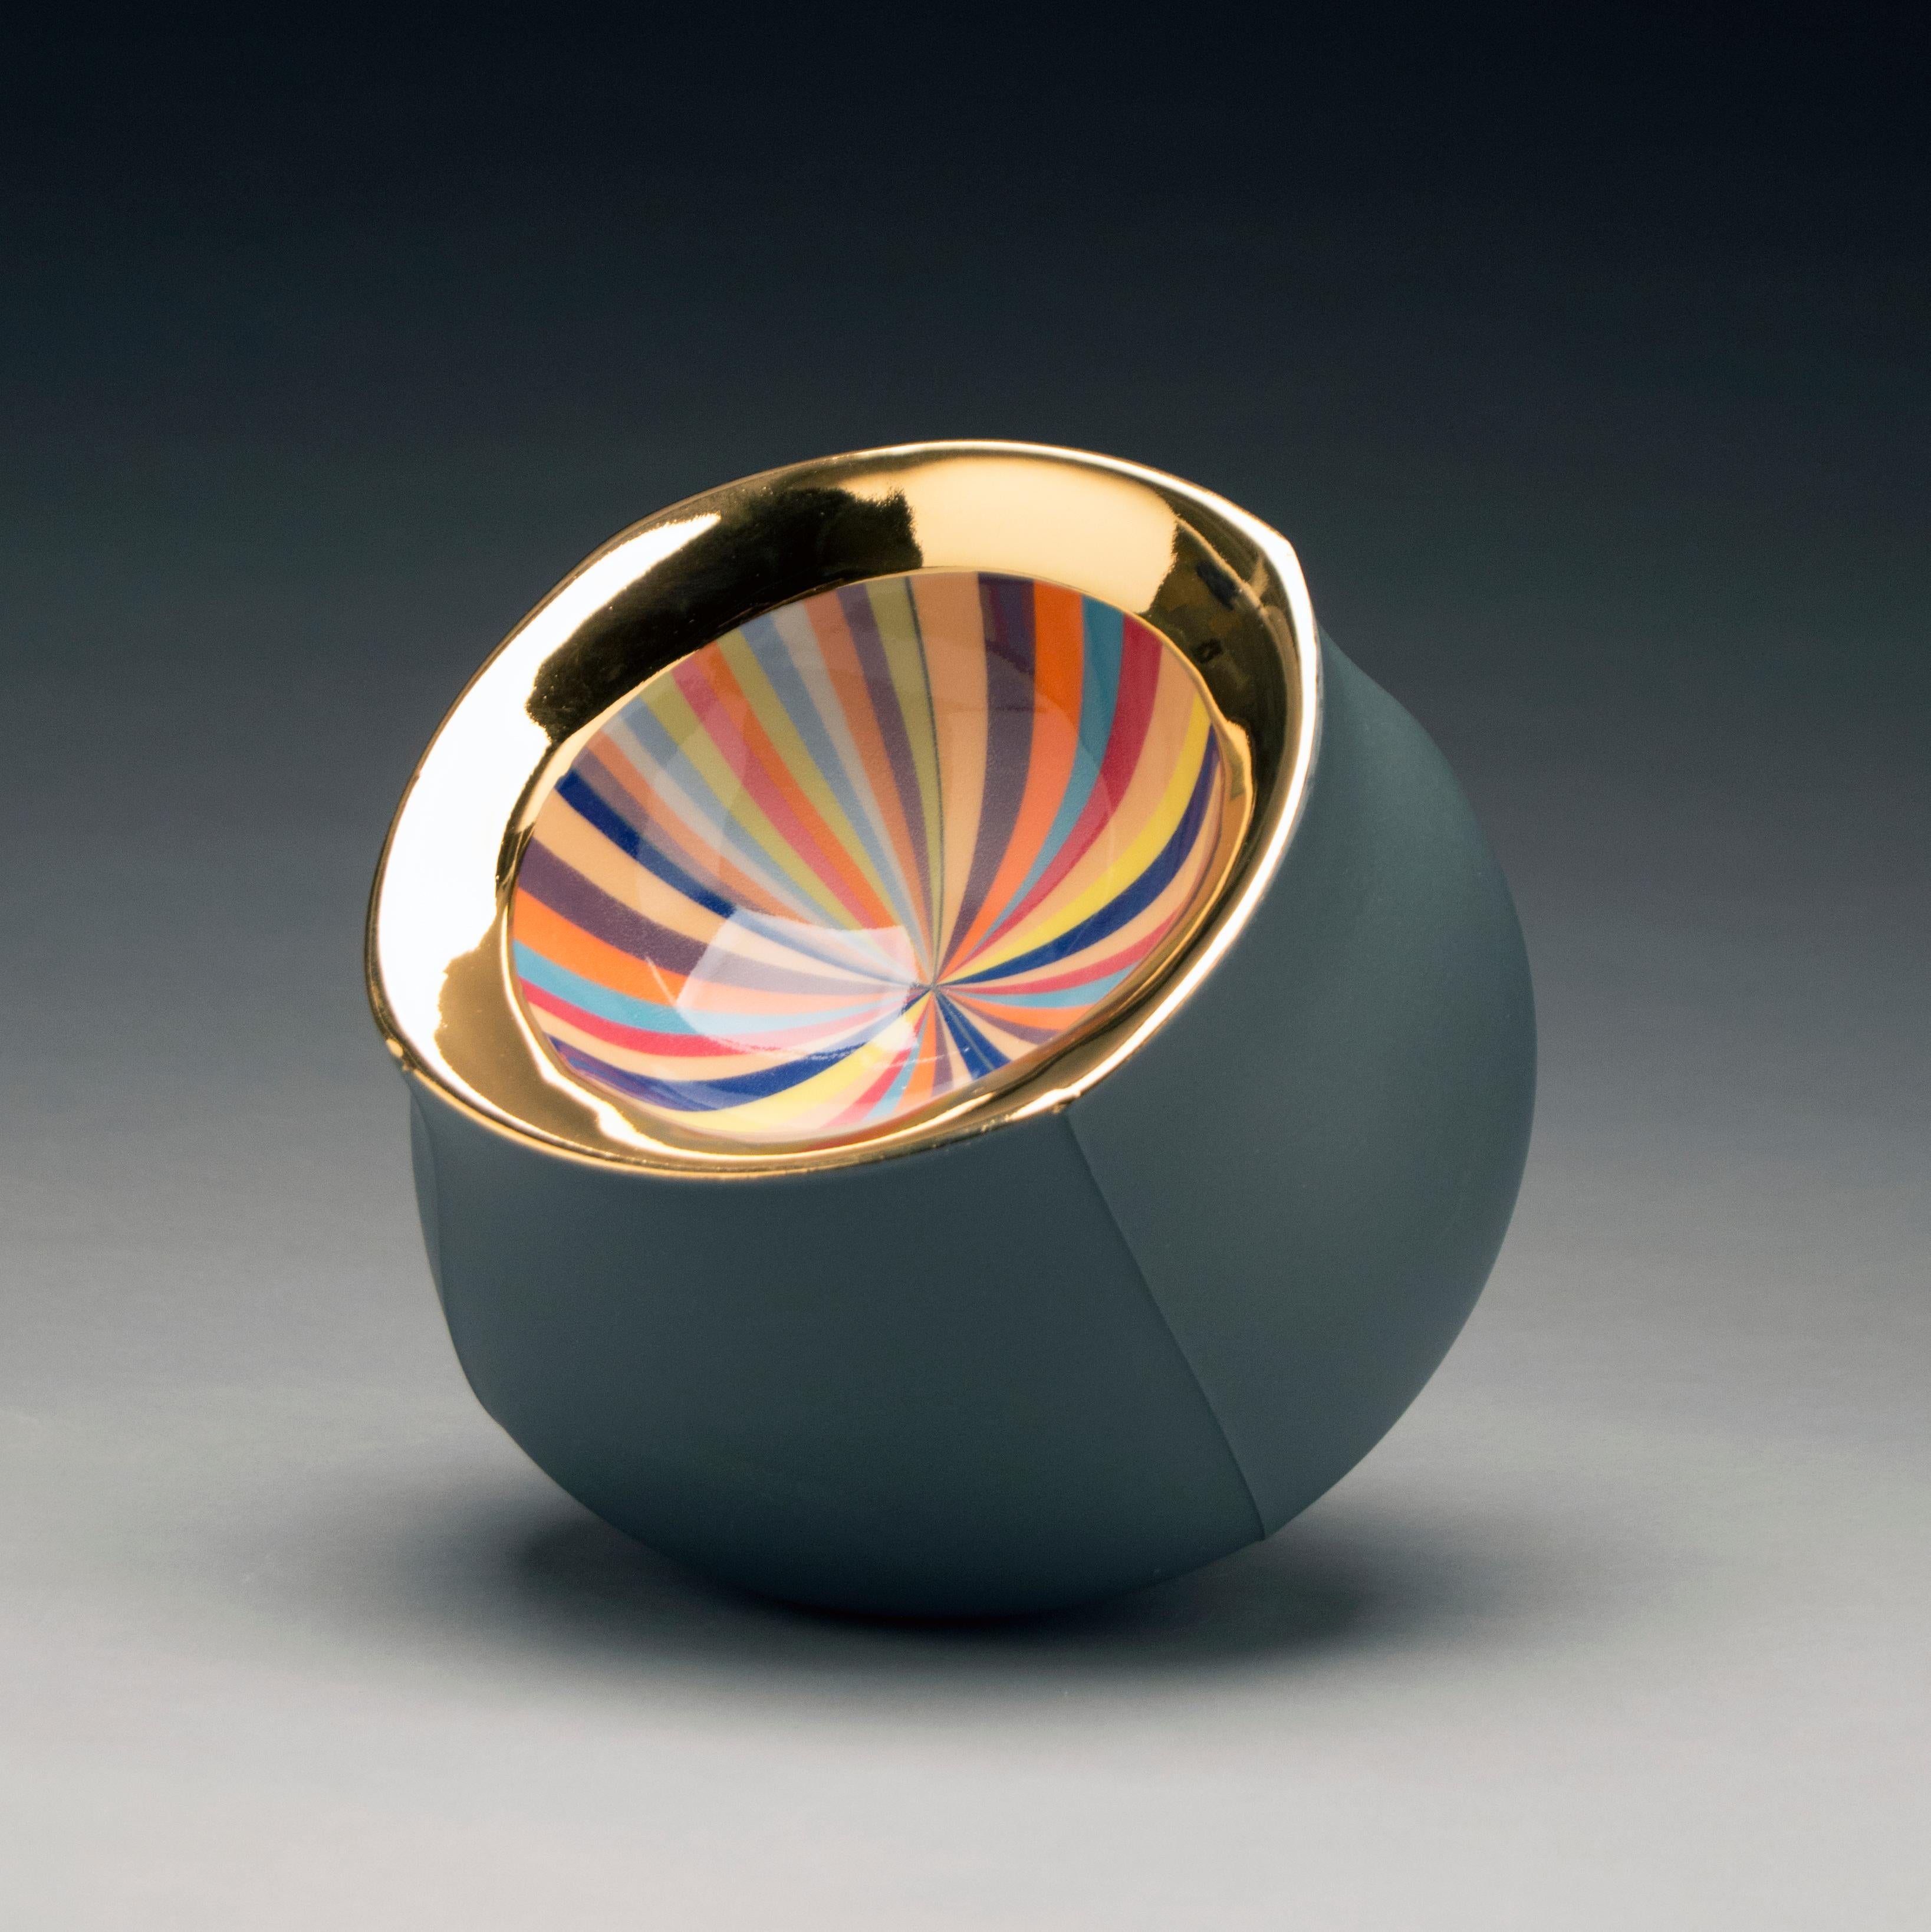 Dark Grey Bowl, Contemporary Design, Slip Cast Porcelain with Colorful Pattern - Sculpture by Peter Pincus